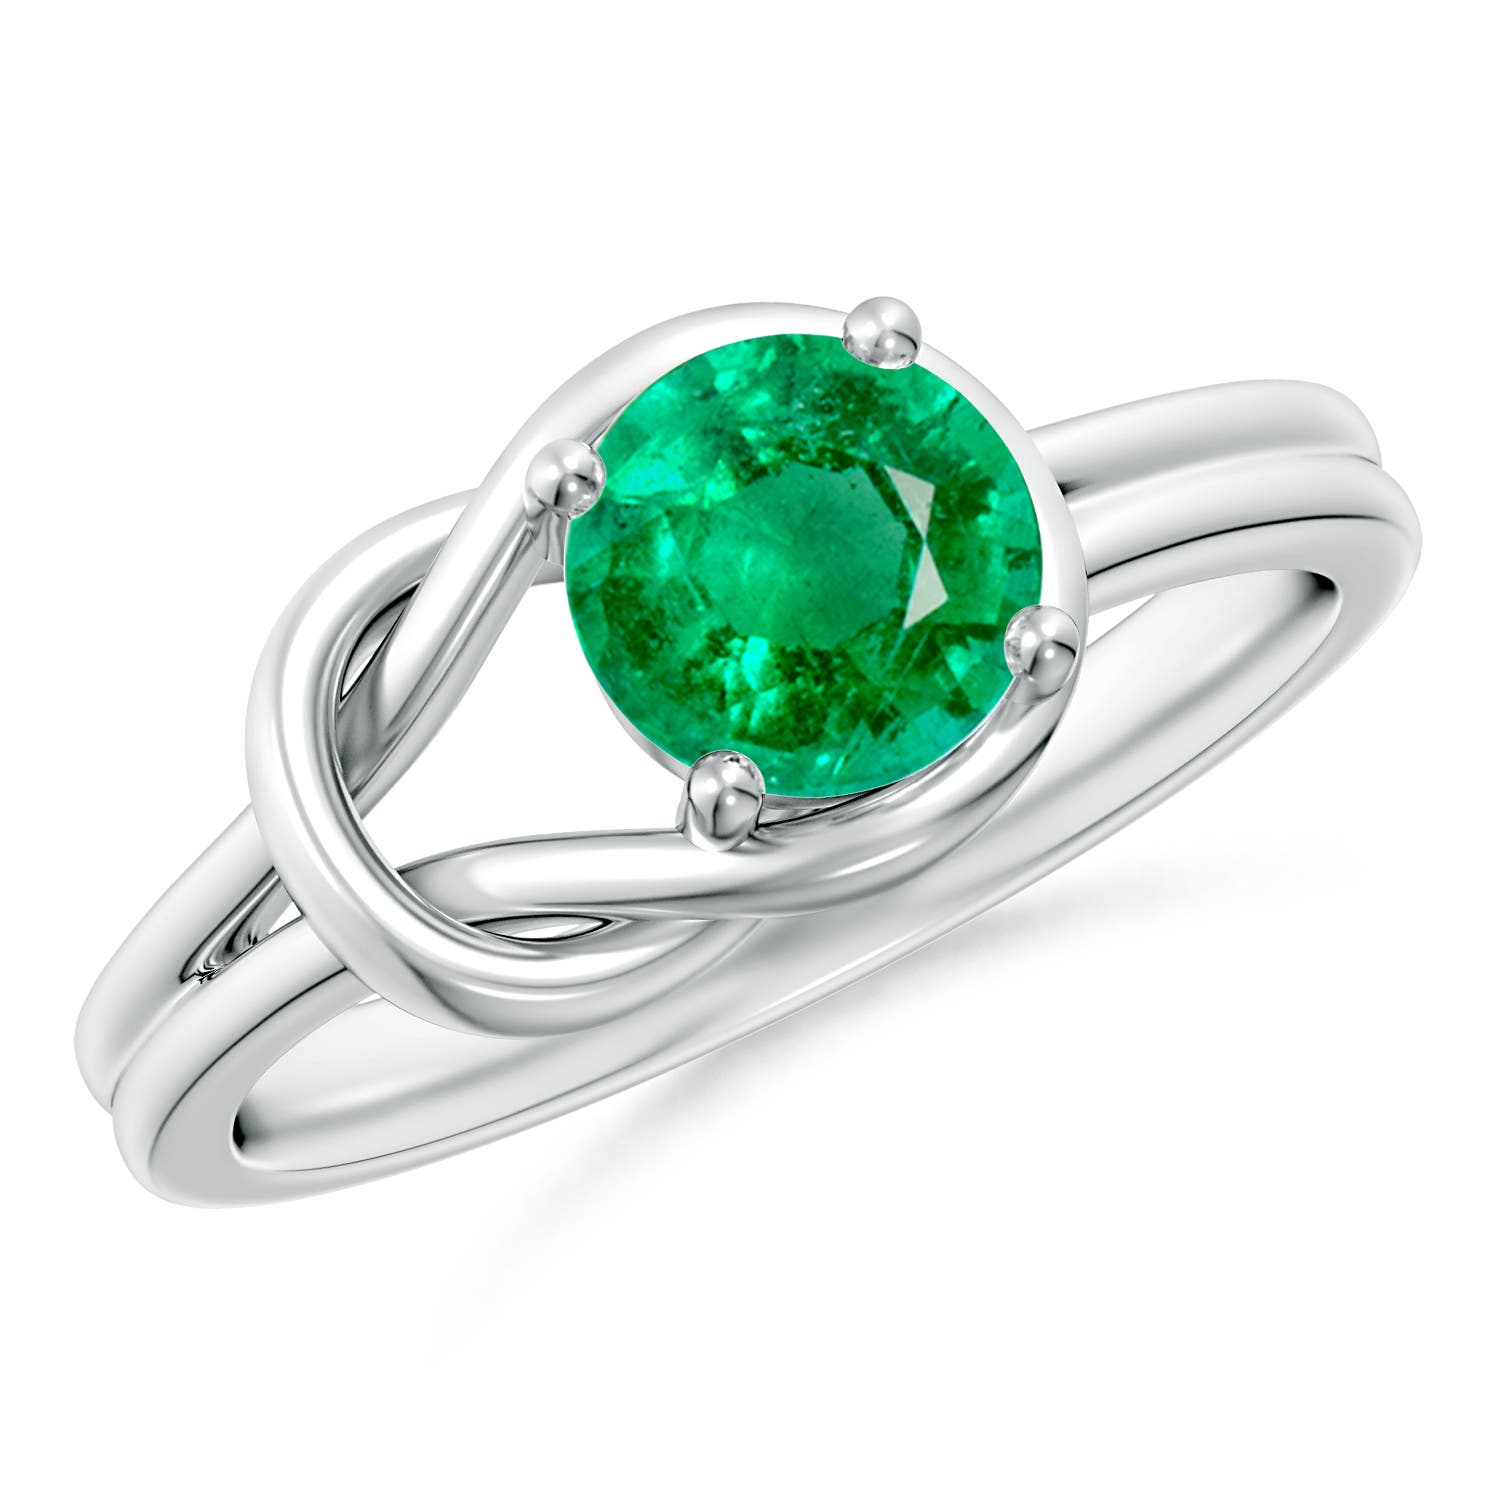 AAA - Emerald / 0.75 CT / 14 KT White Gold